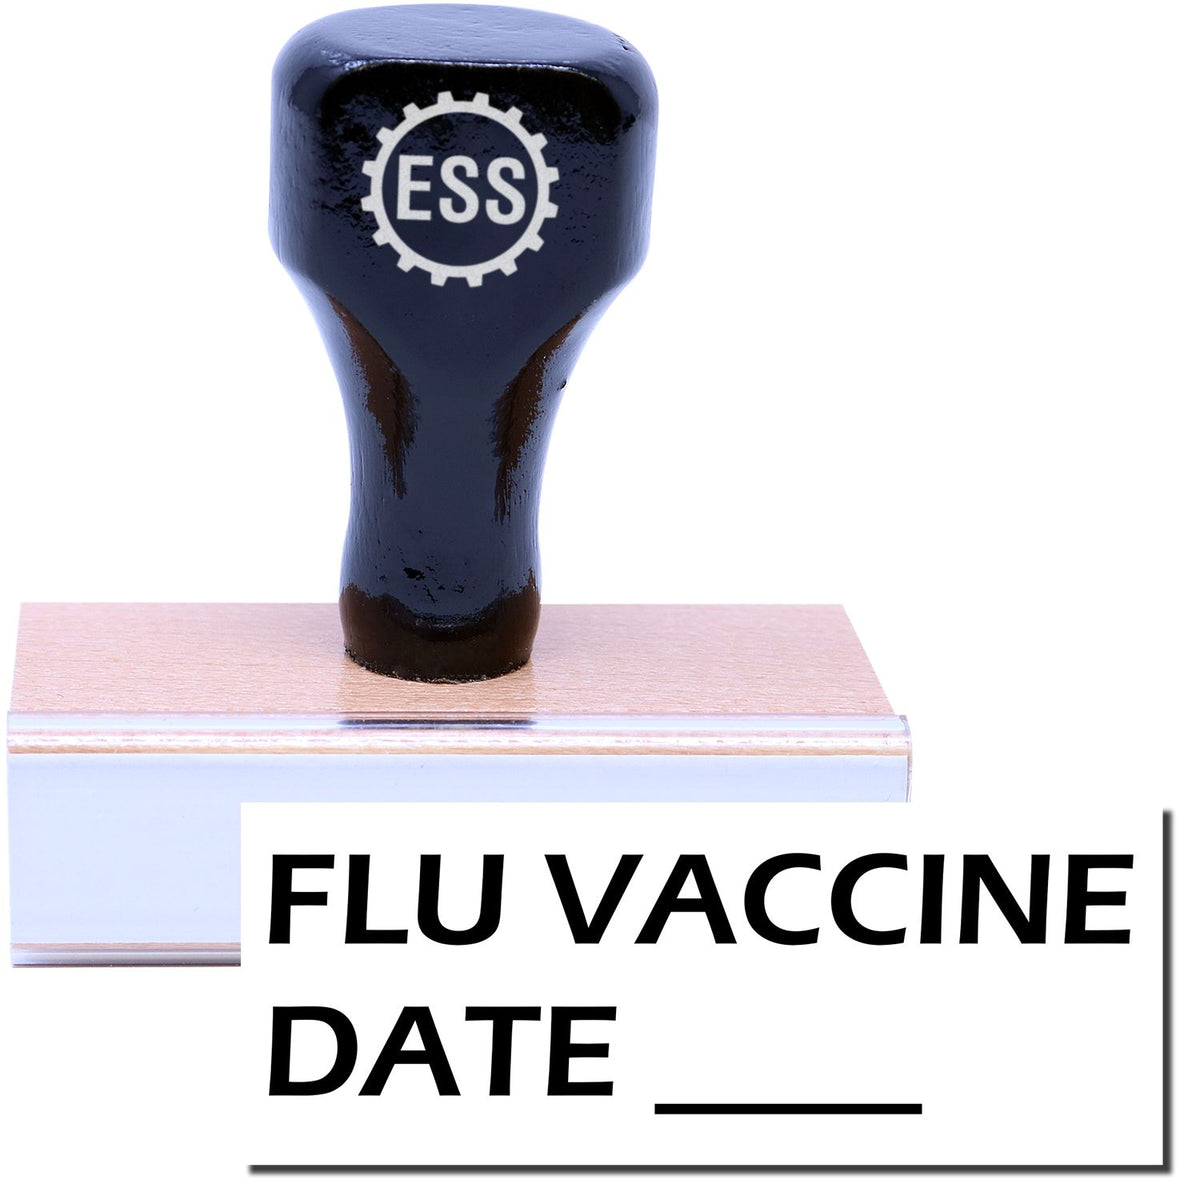 A stock office rubber stamp with a stamped image showing how the text &quot;FLU VACCINE DATE ____&quot; in a large font is displayed after stamping.